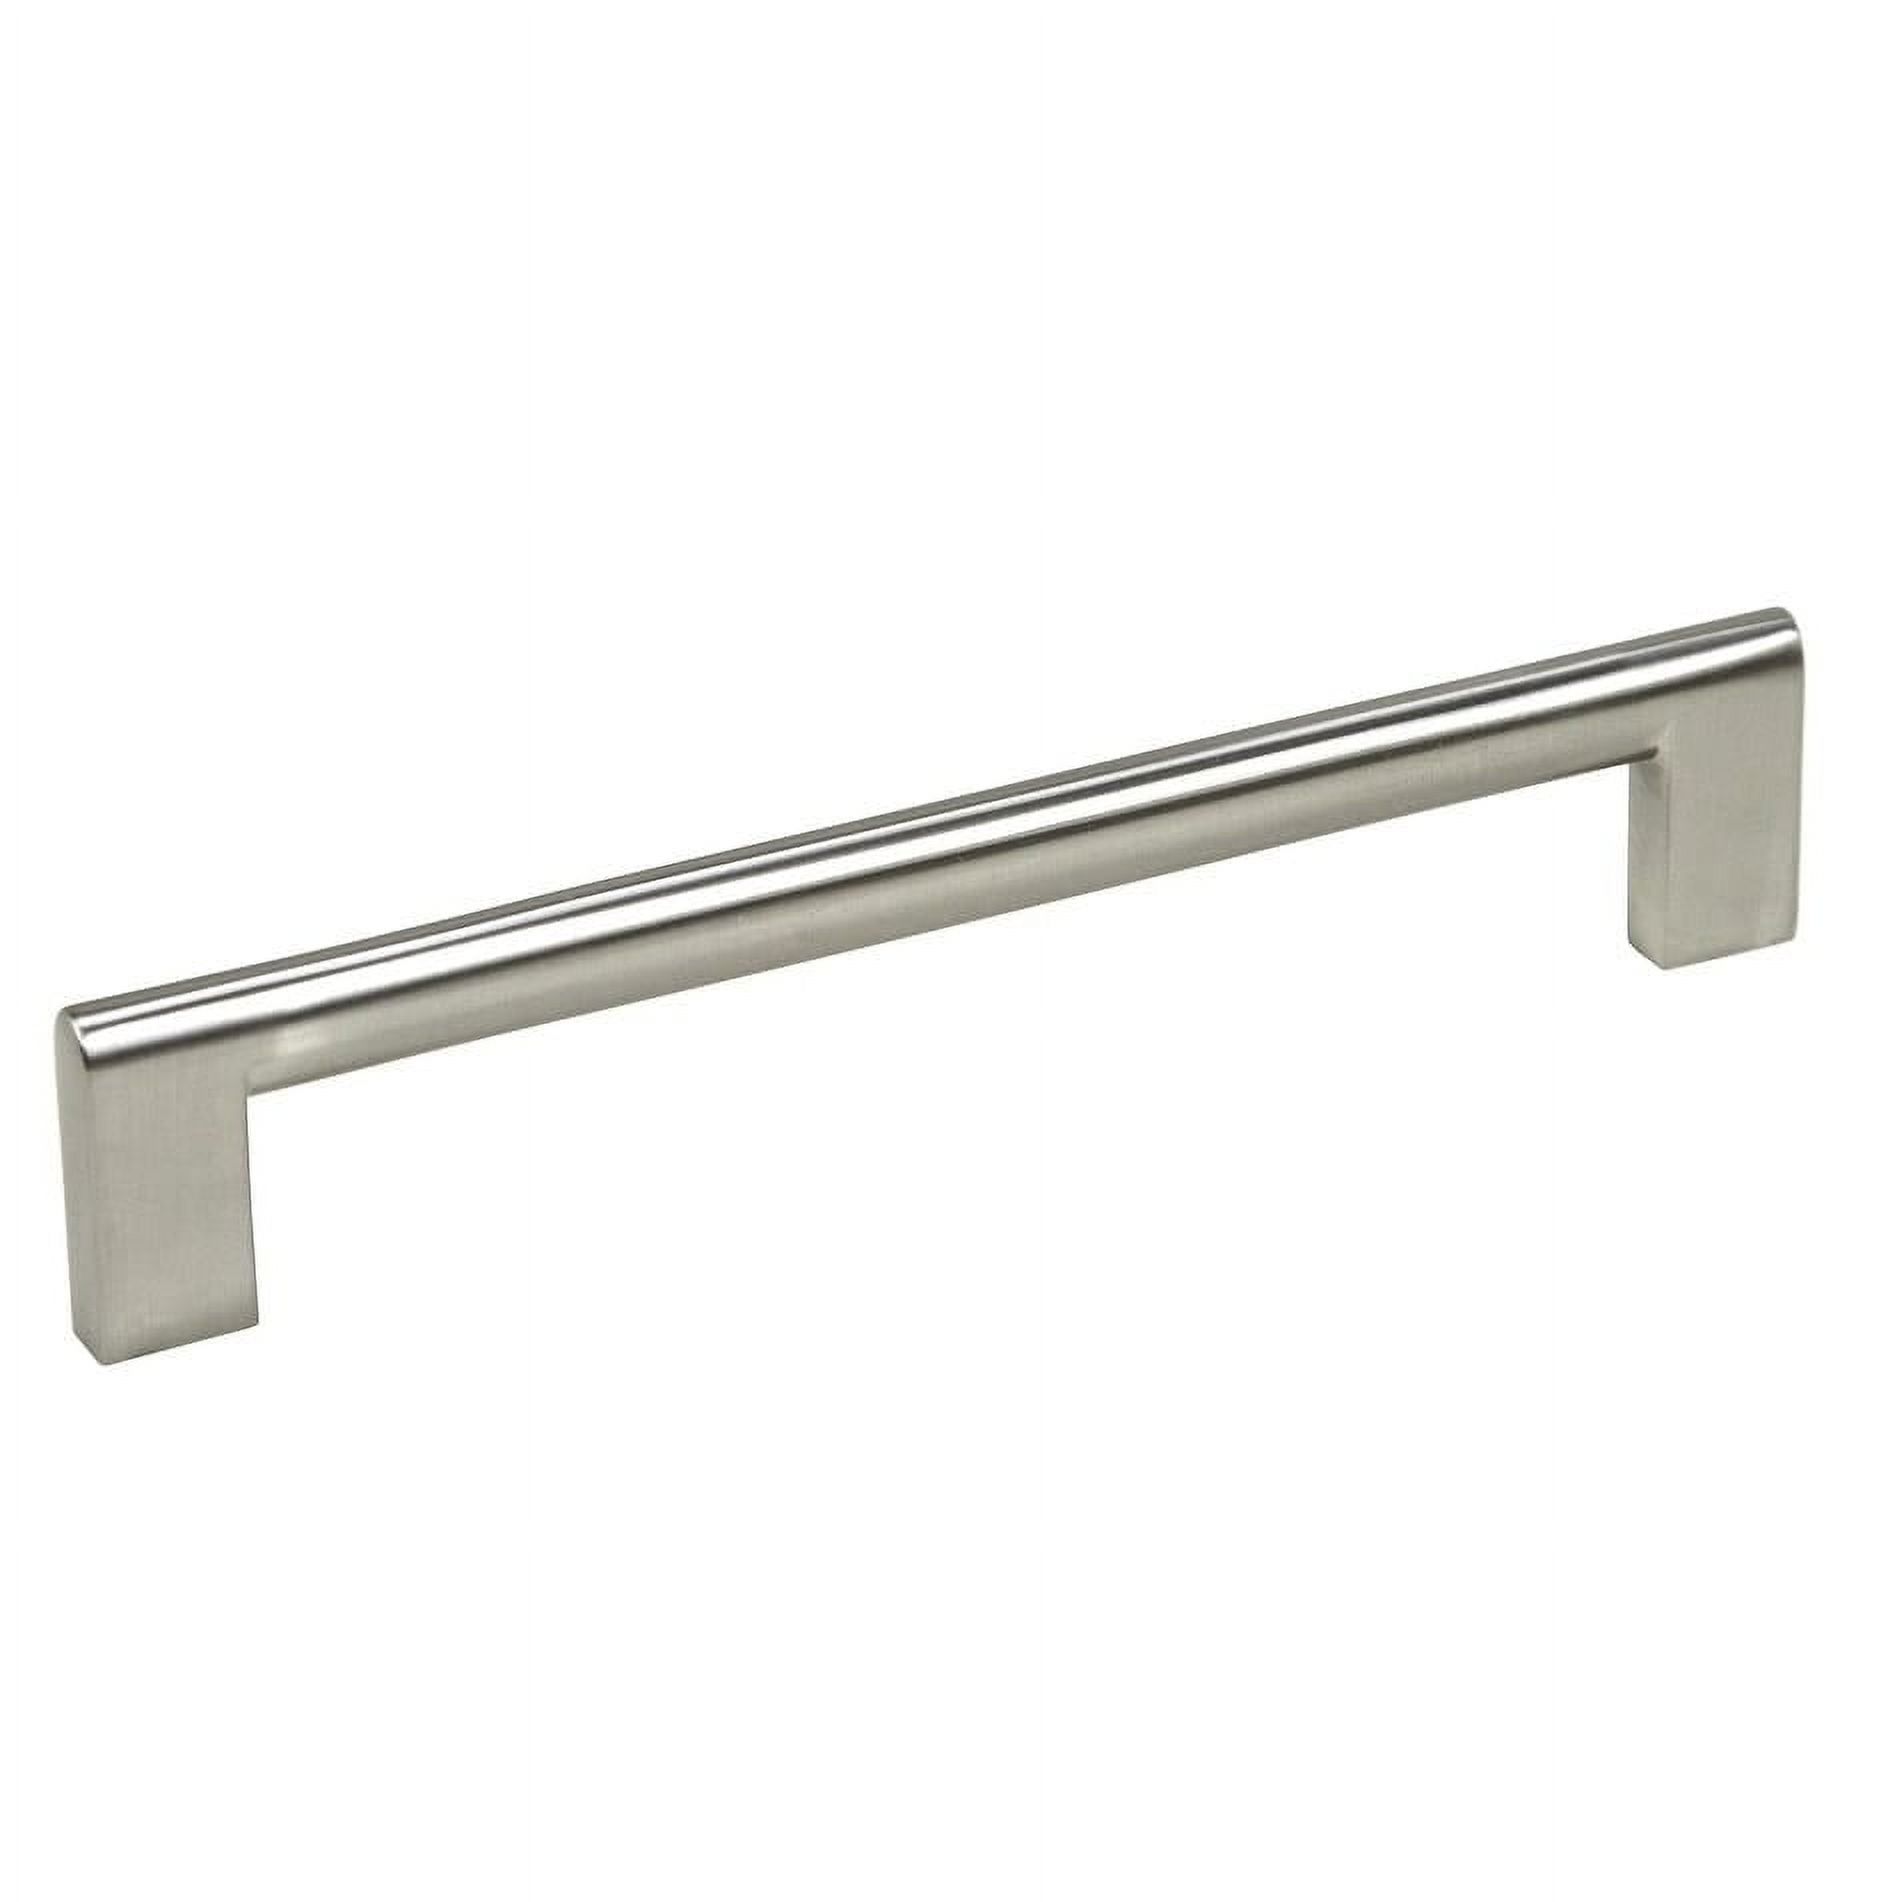 6-15/16 inch Key Shape Stainless Steel Handle Contemporary 6-15/16" Key Shape Design Stainless Steel Finish Cabinet Bar Pull Handle (Case of 4) - image 1 of 5